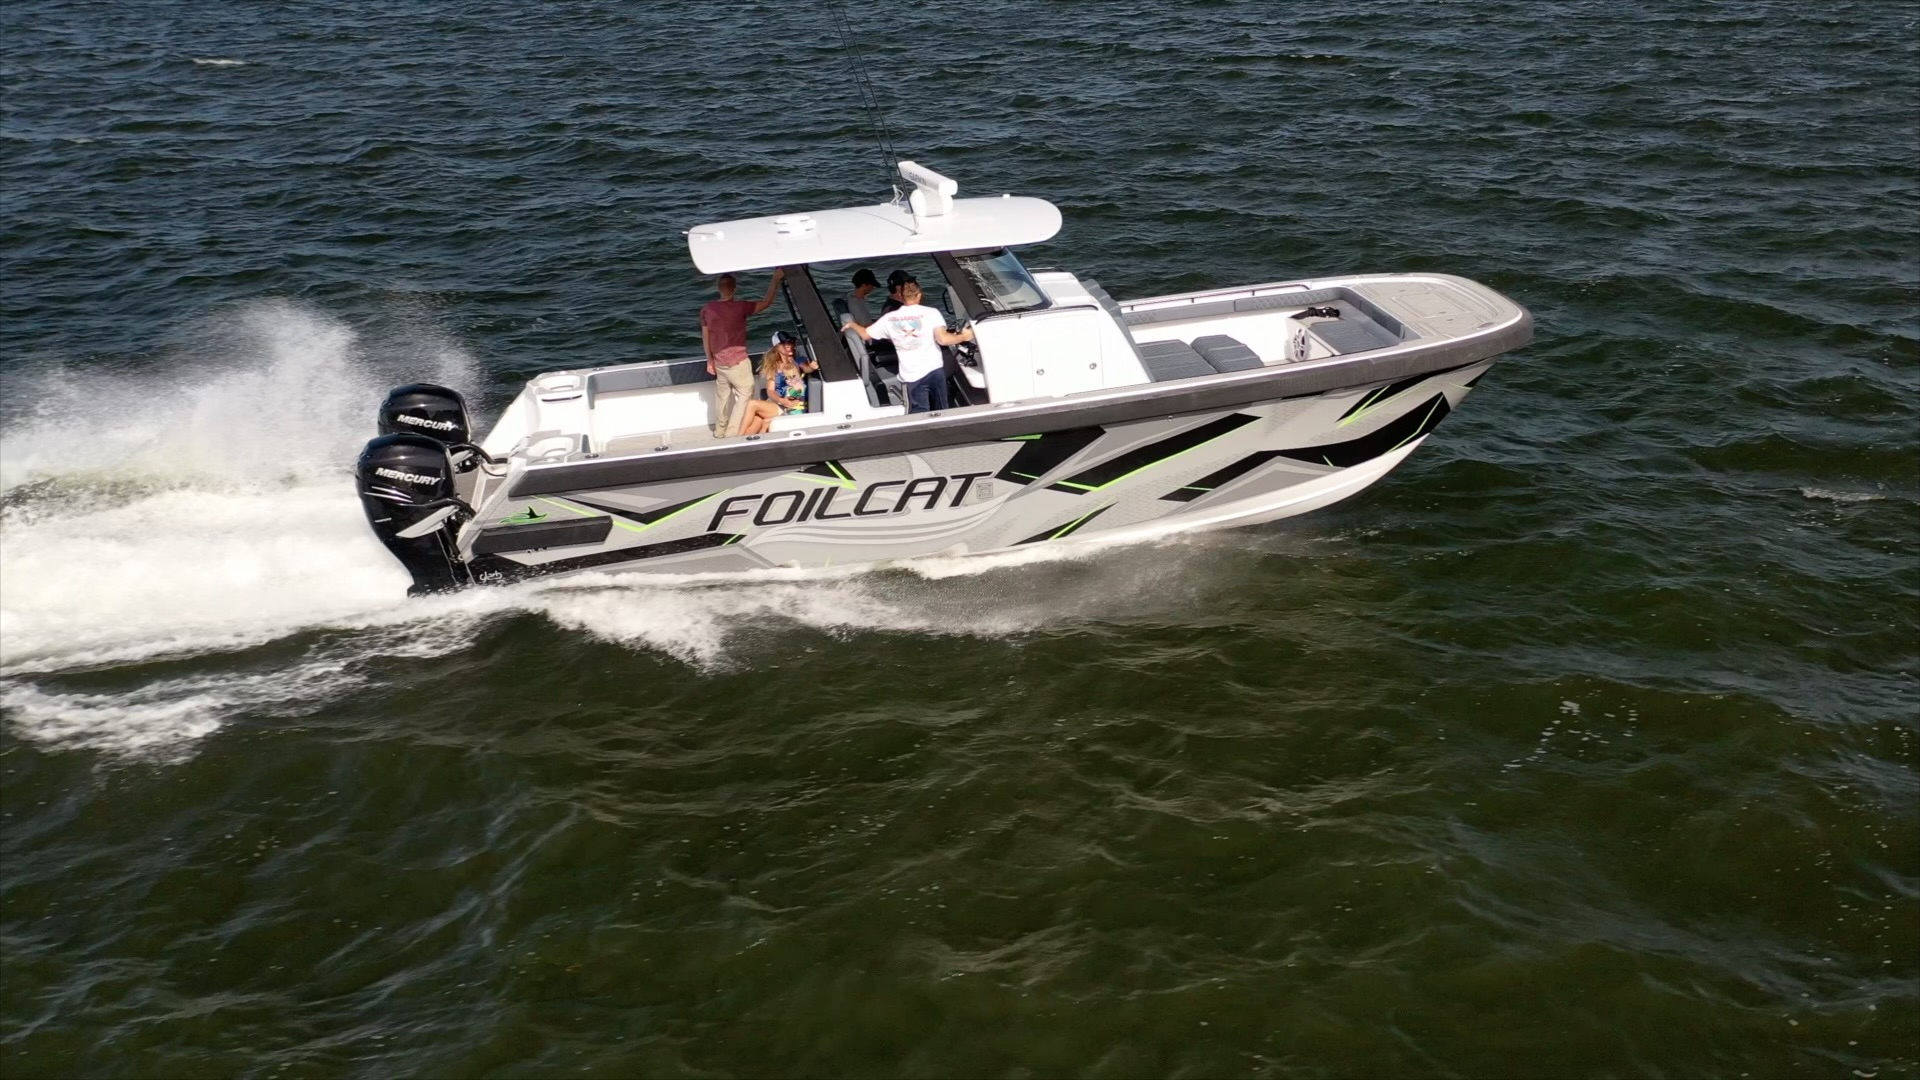 FoilCat: The Foiling Power Catamarans Elevating Center Console Boats